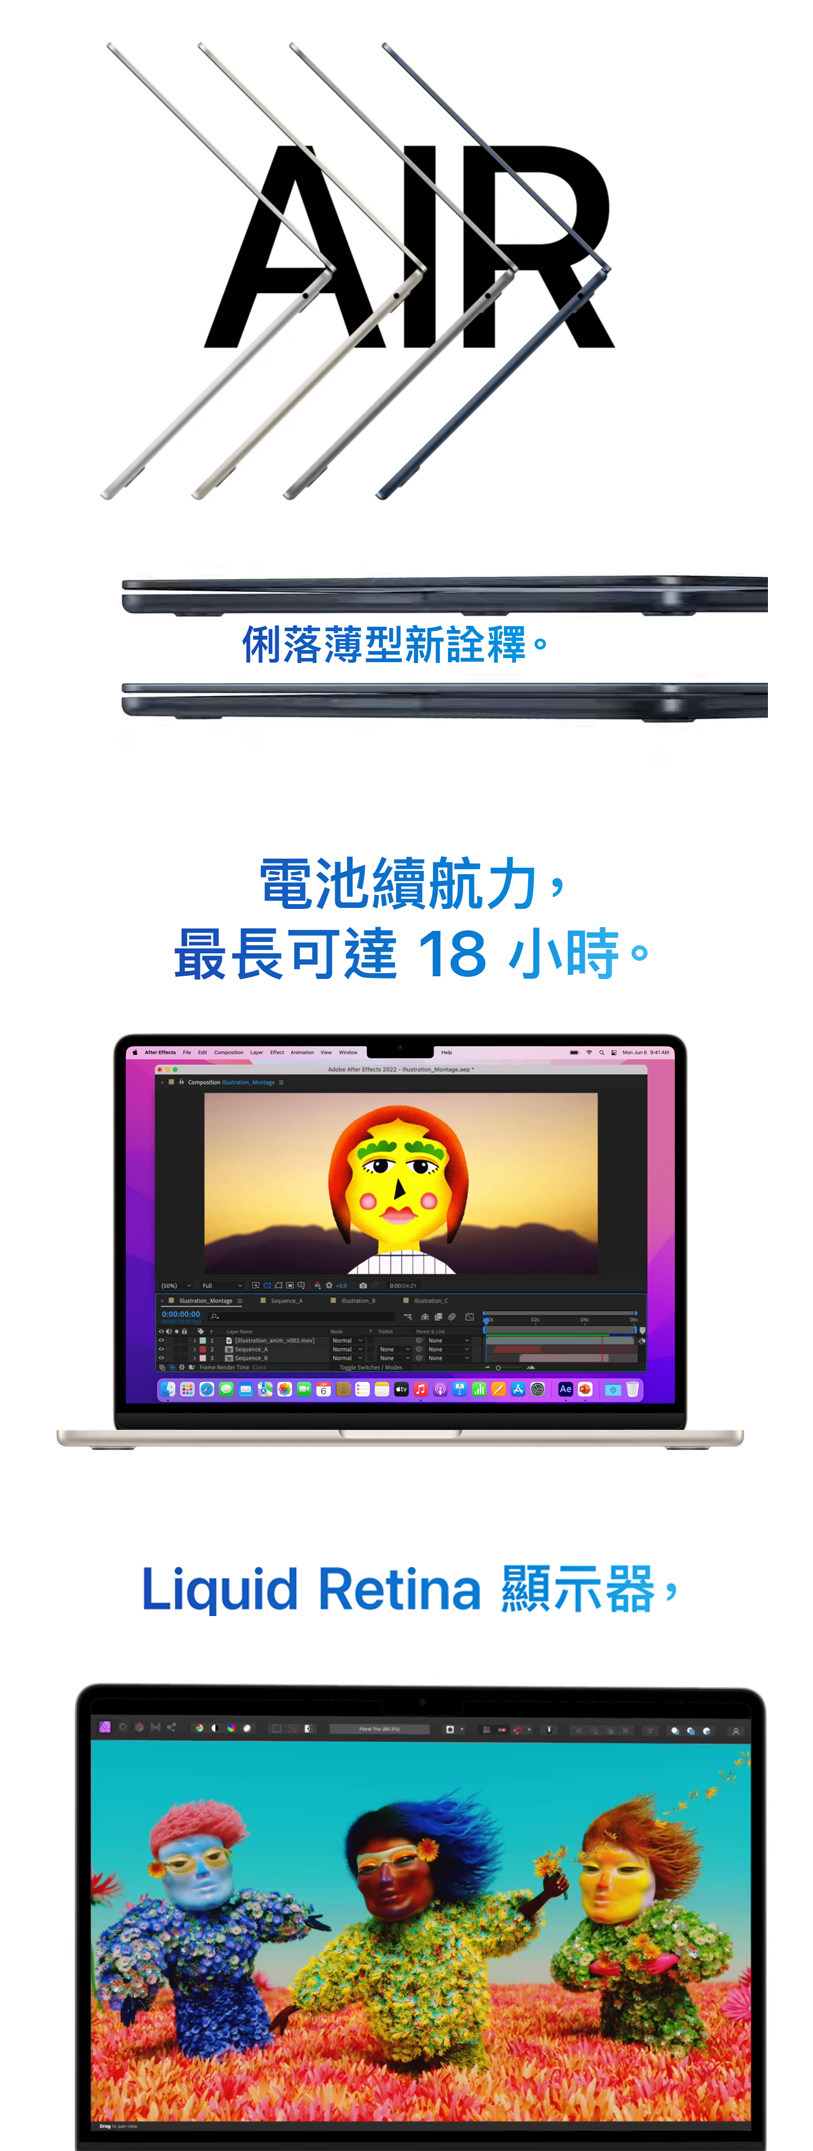 AIR俐落薄型新詮釋。電池續航力最長可達 18 小時。          Composition Adobe After Effects 2022_Montage  000Sequenceustration0000000  Sequence ASequence 6None SwitchesALiquid Retina 顯示器,Retina,